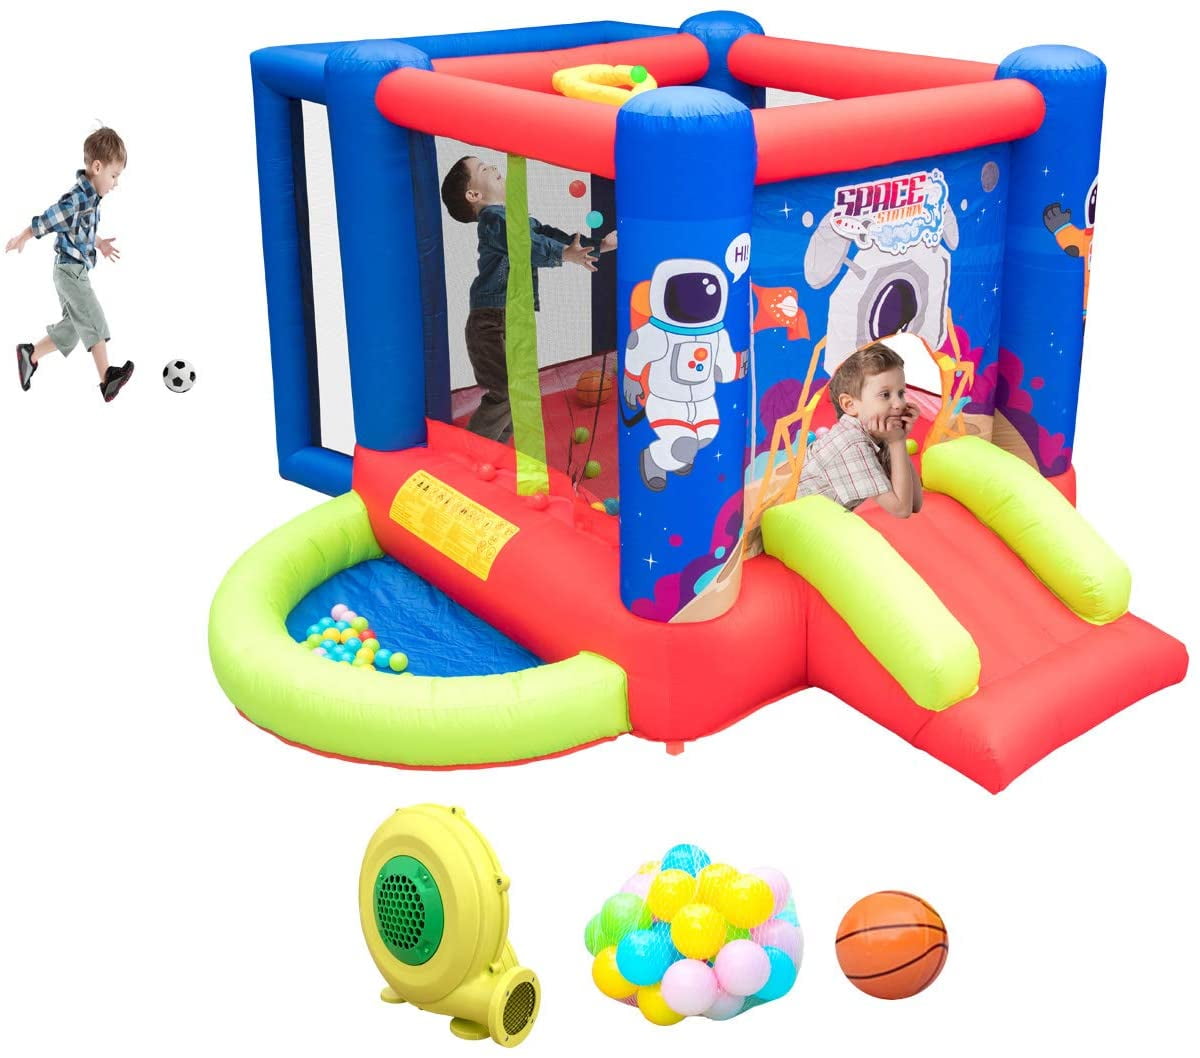 Bouncy Castle With Slide & Hoop Electric Air Blower Airflow Inflation Garden Fun 